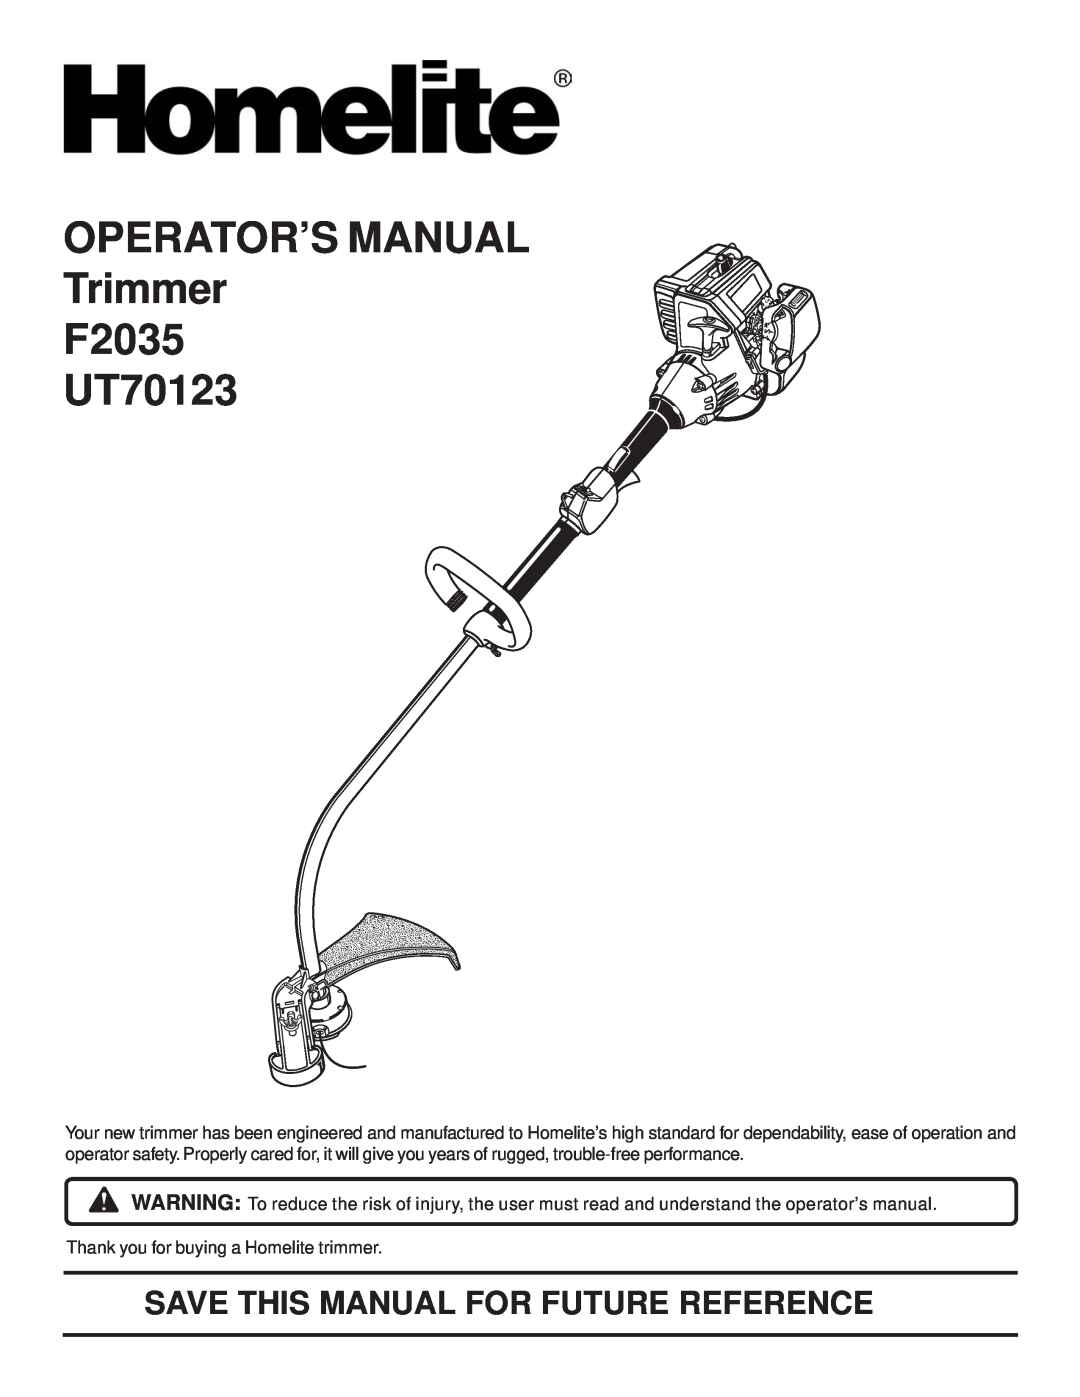 Homelite manual OPERATOR’S MANUAL Trimmer F2035 UT70123, Save This Manual For Future Reference 